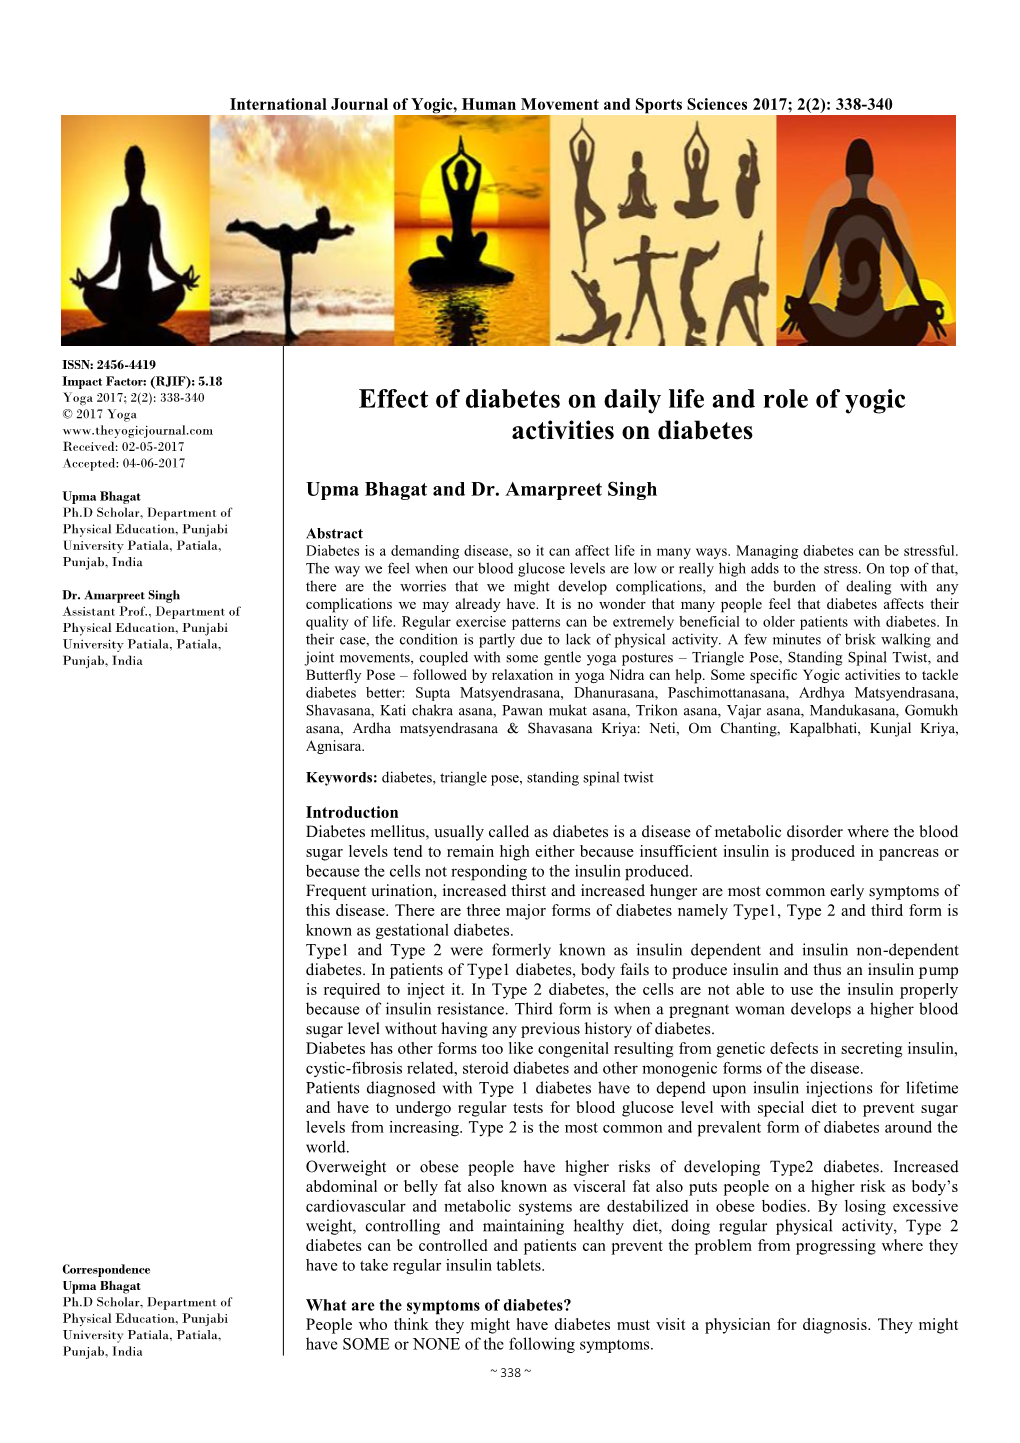 Effect of Diabetes on Daily Life and Role of Yogic Activities on Diabetes